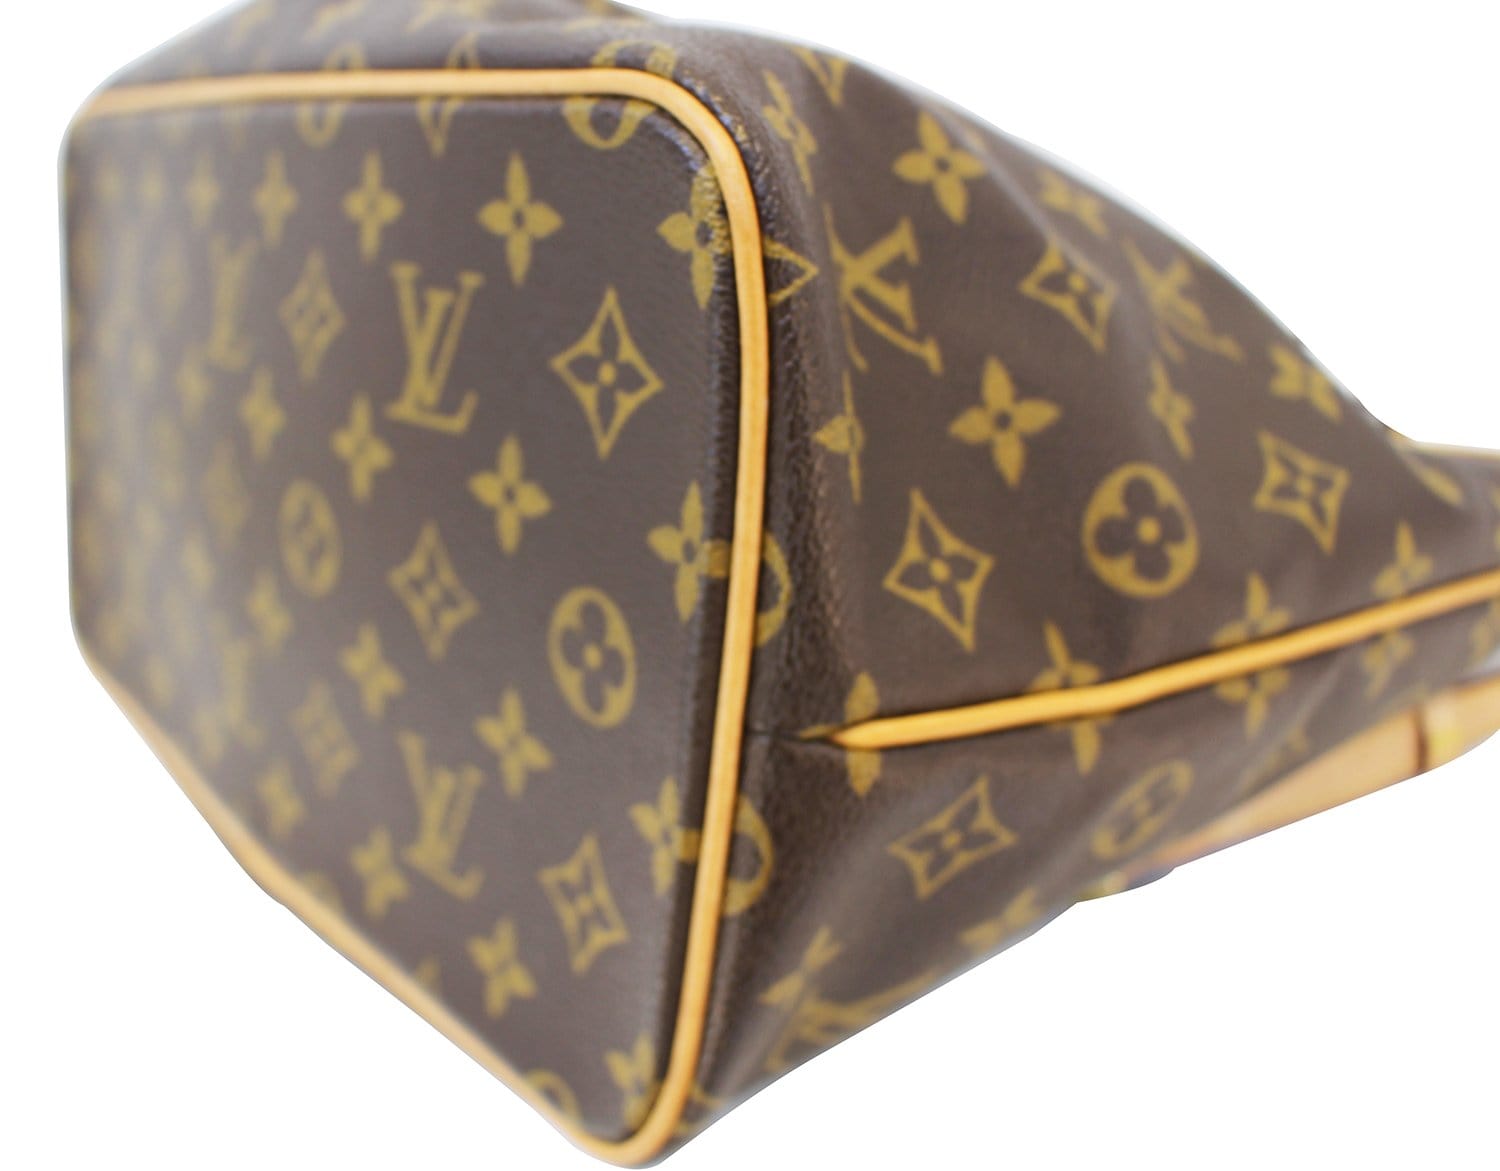 Louis Vuitton Palermo PM In Monogram for Sale in Hollywood, FL